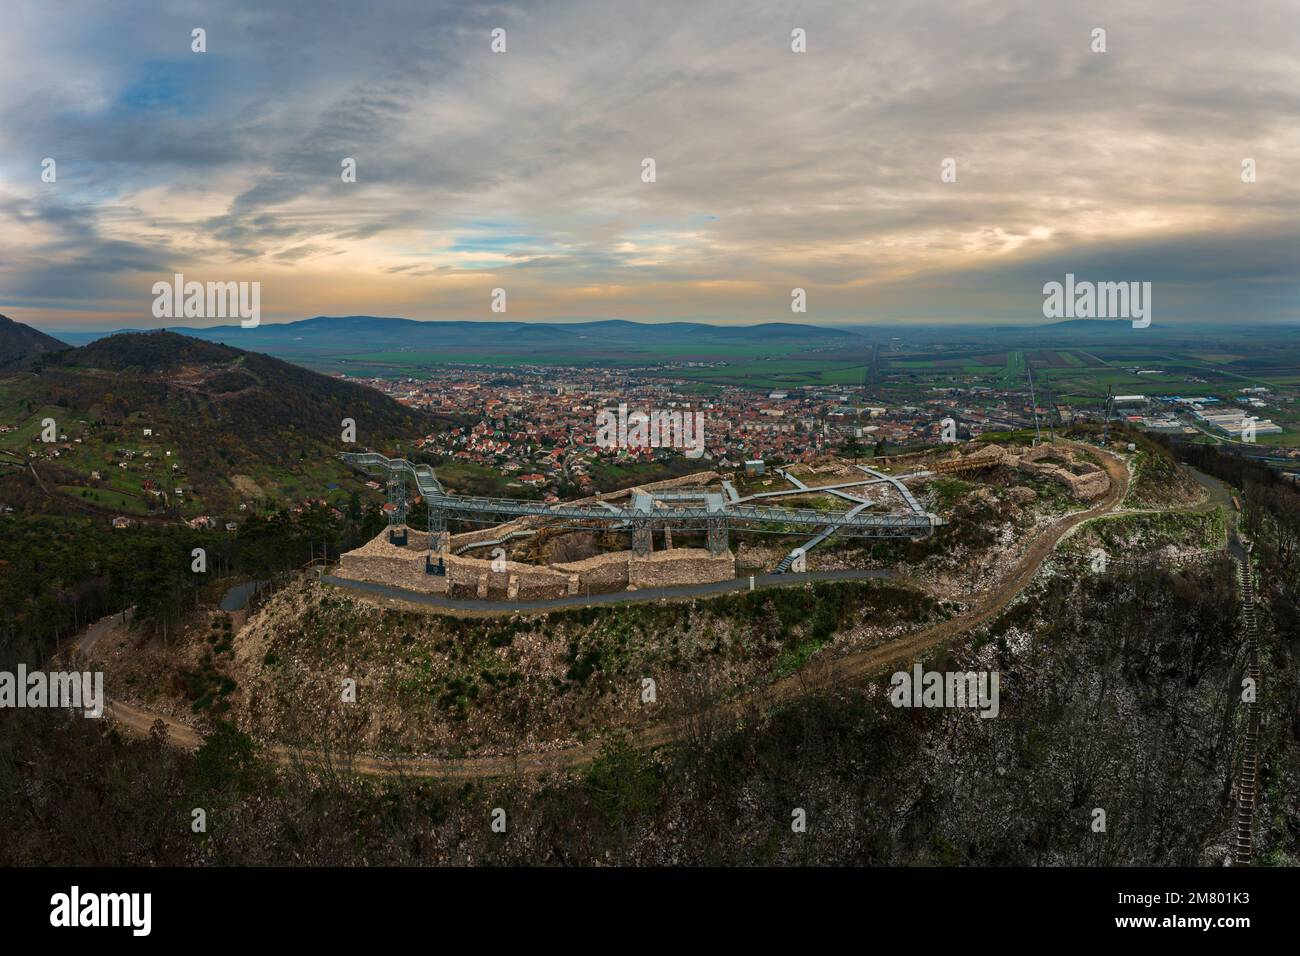 Amazing renewed touristical attraction in Hungary Tokaj region Zemplen mountains. The name is fort of Storaljaujhely. Historical castle ruins with new Stock Photo